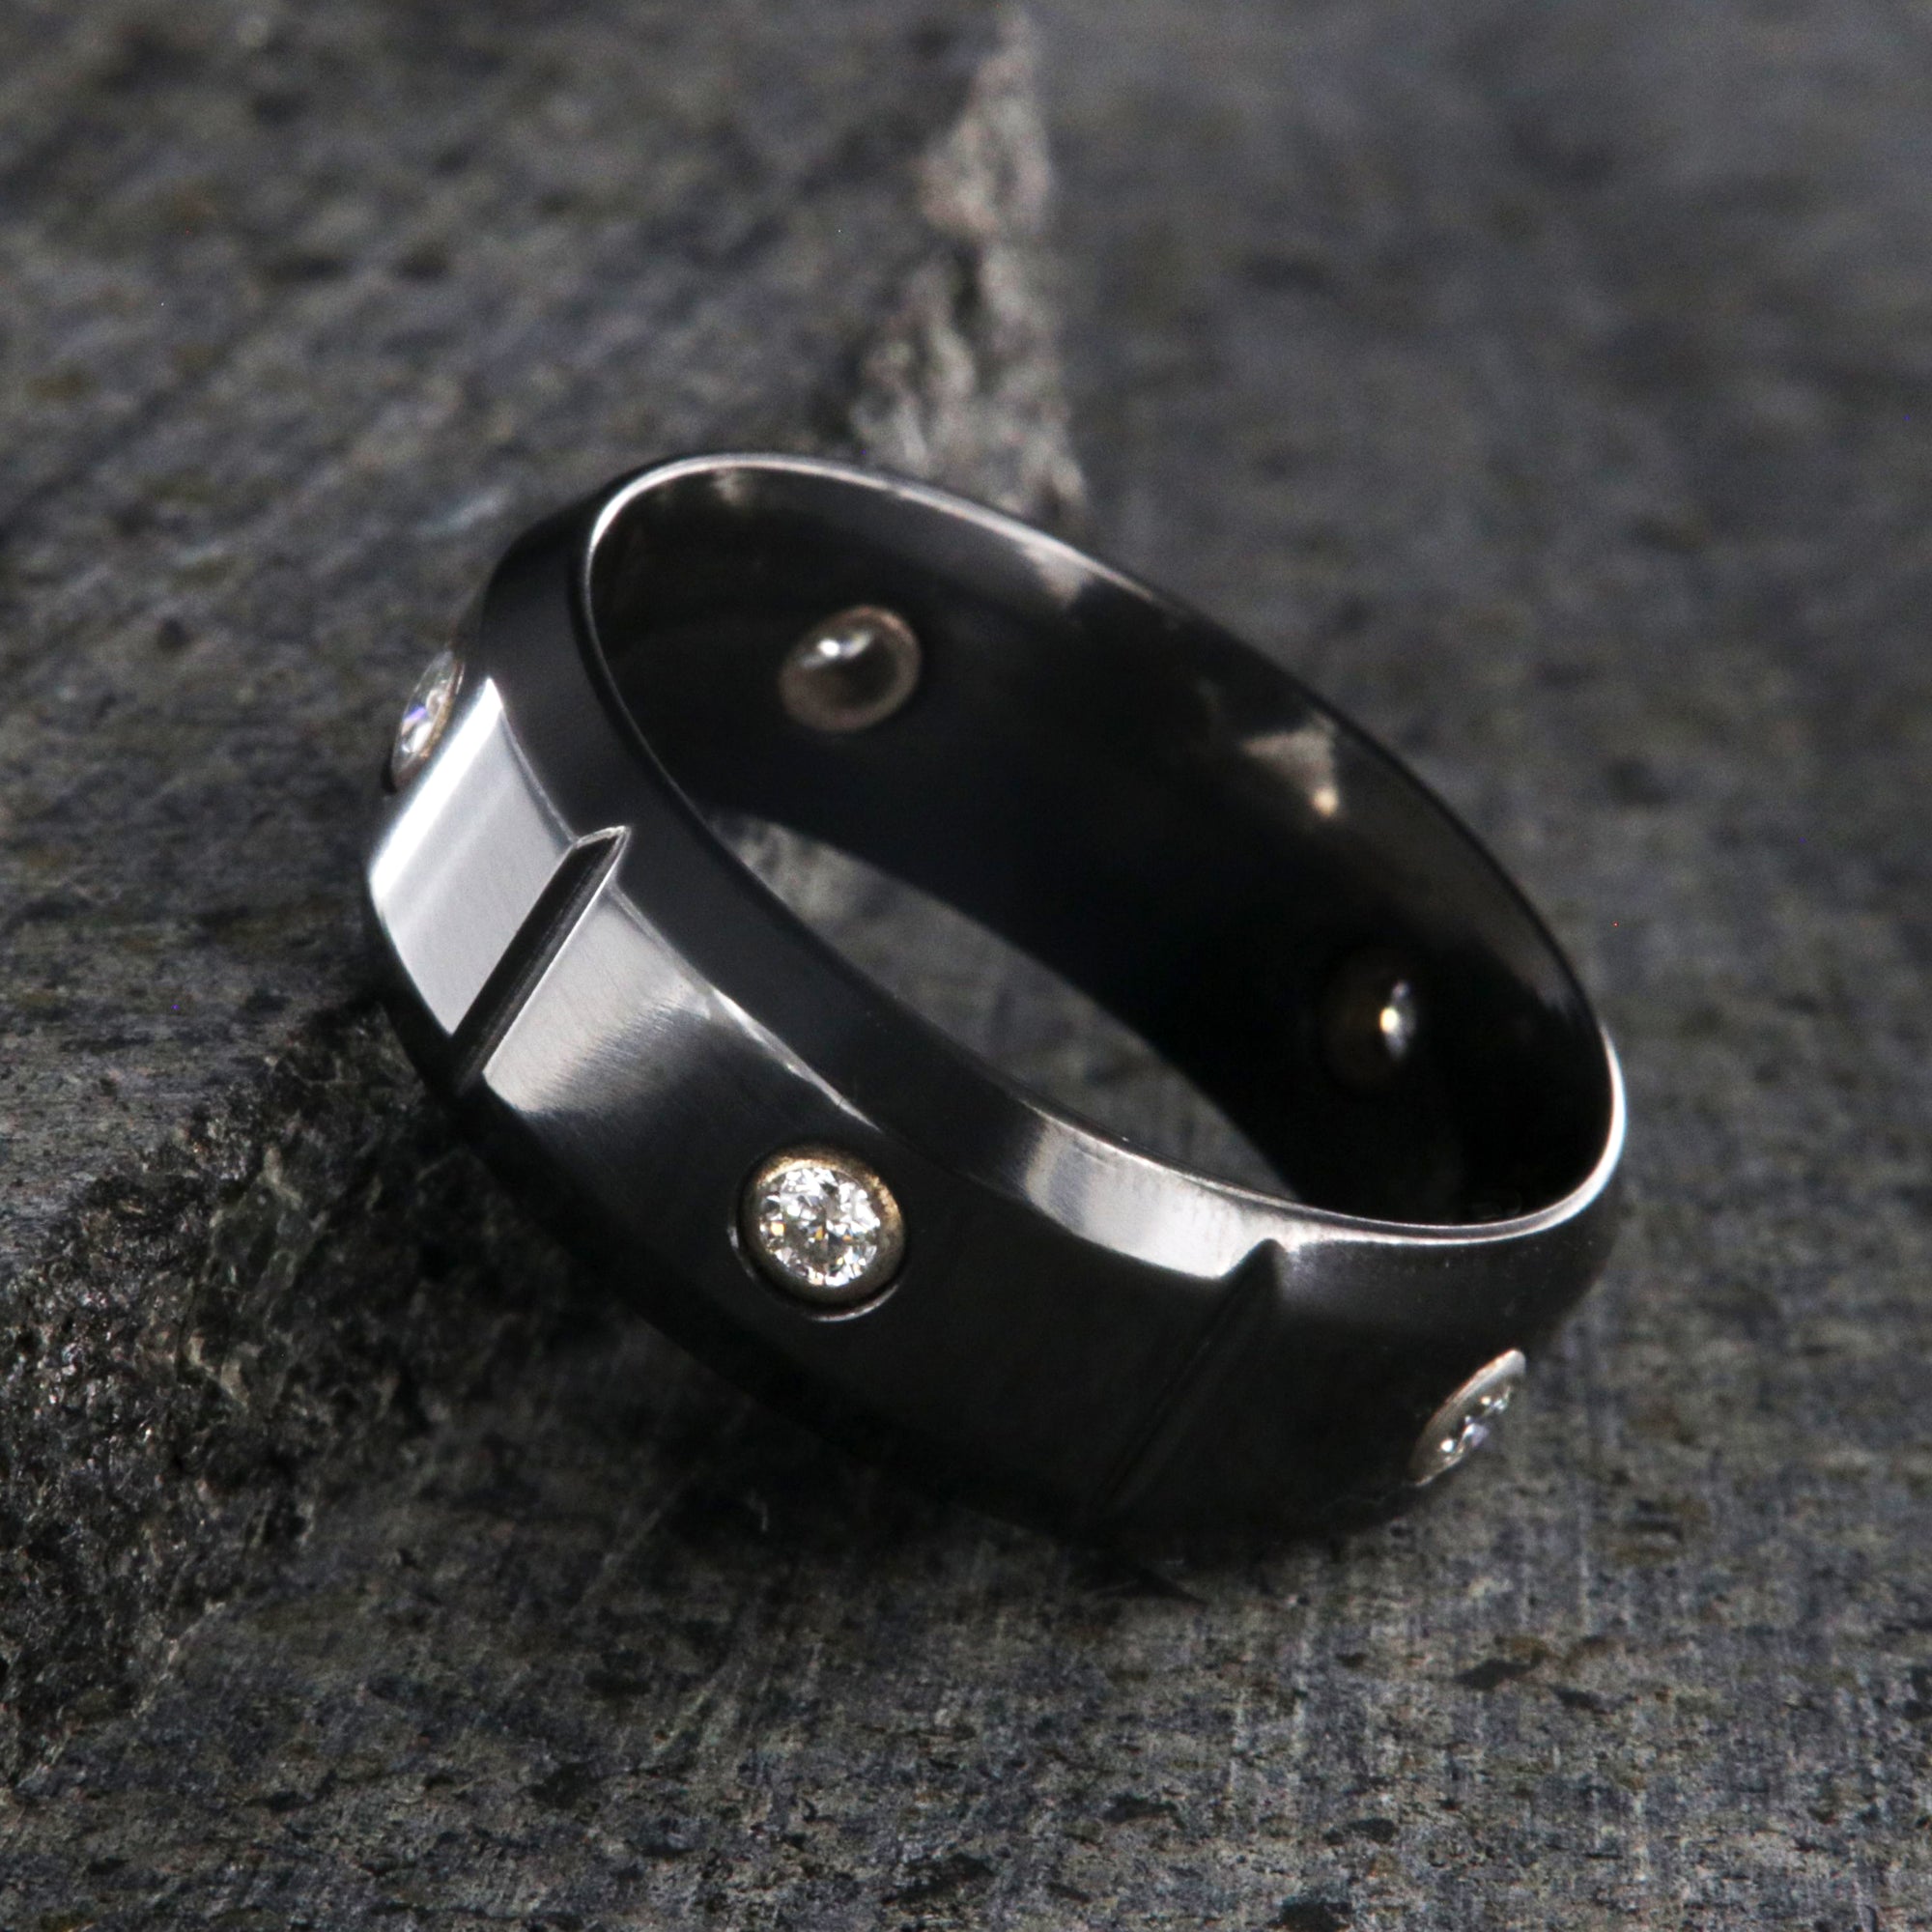 8mm wide black zirconium wedding band with 5 diamonds, beveled edges, and vertical grooves